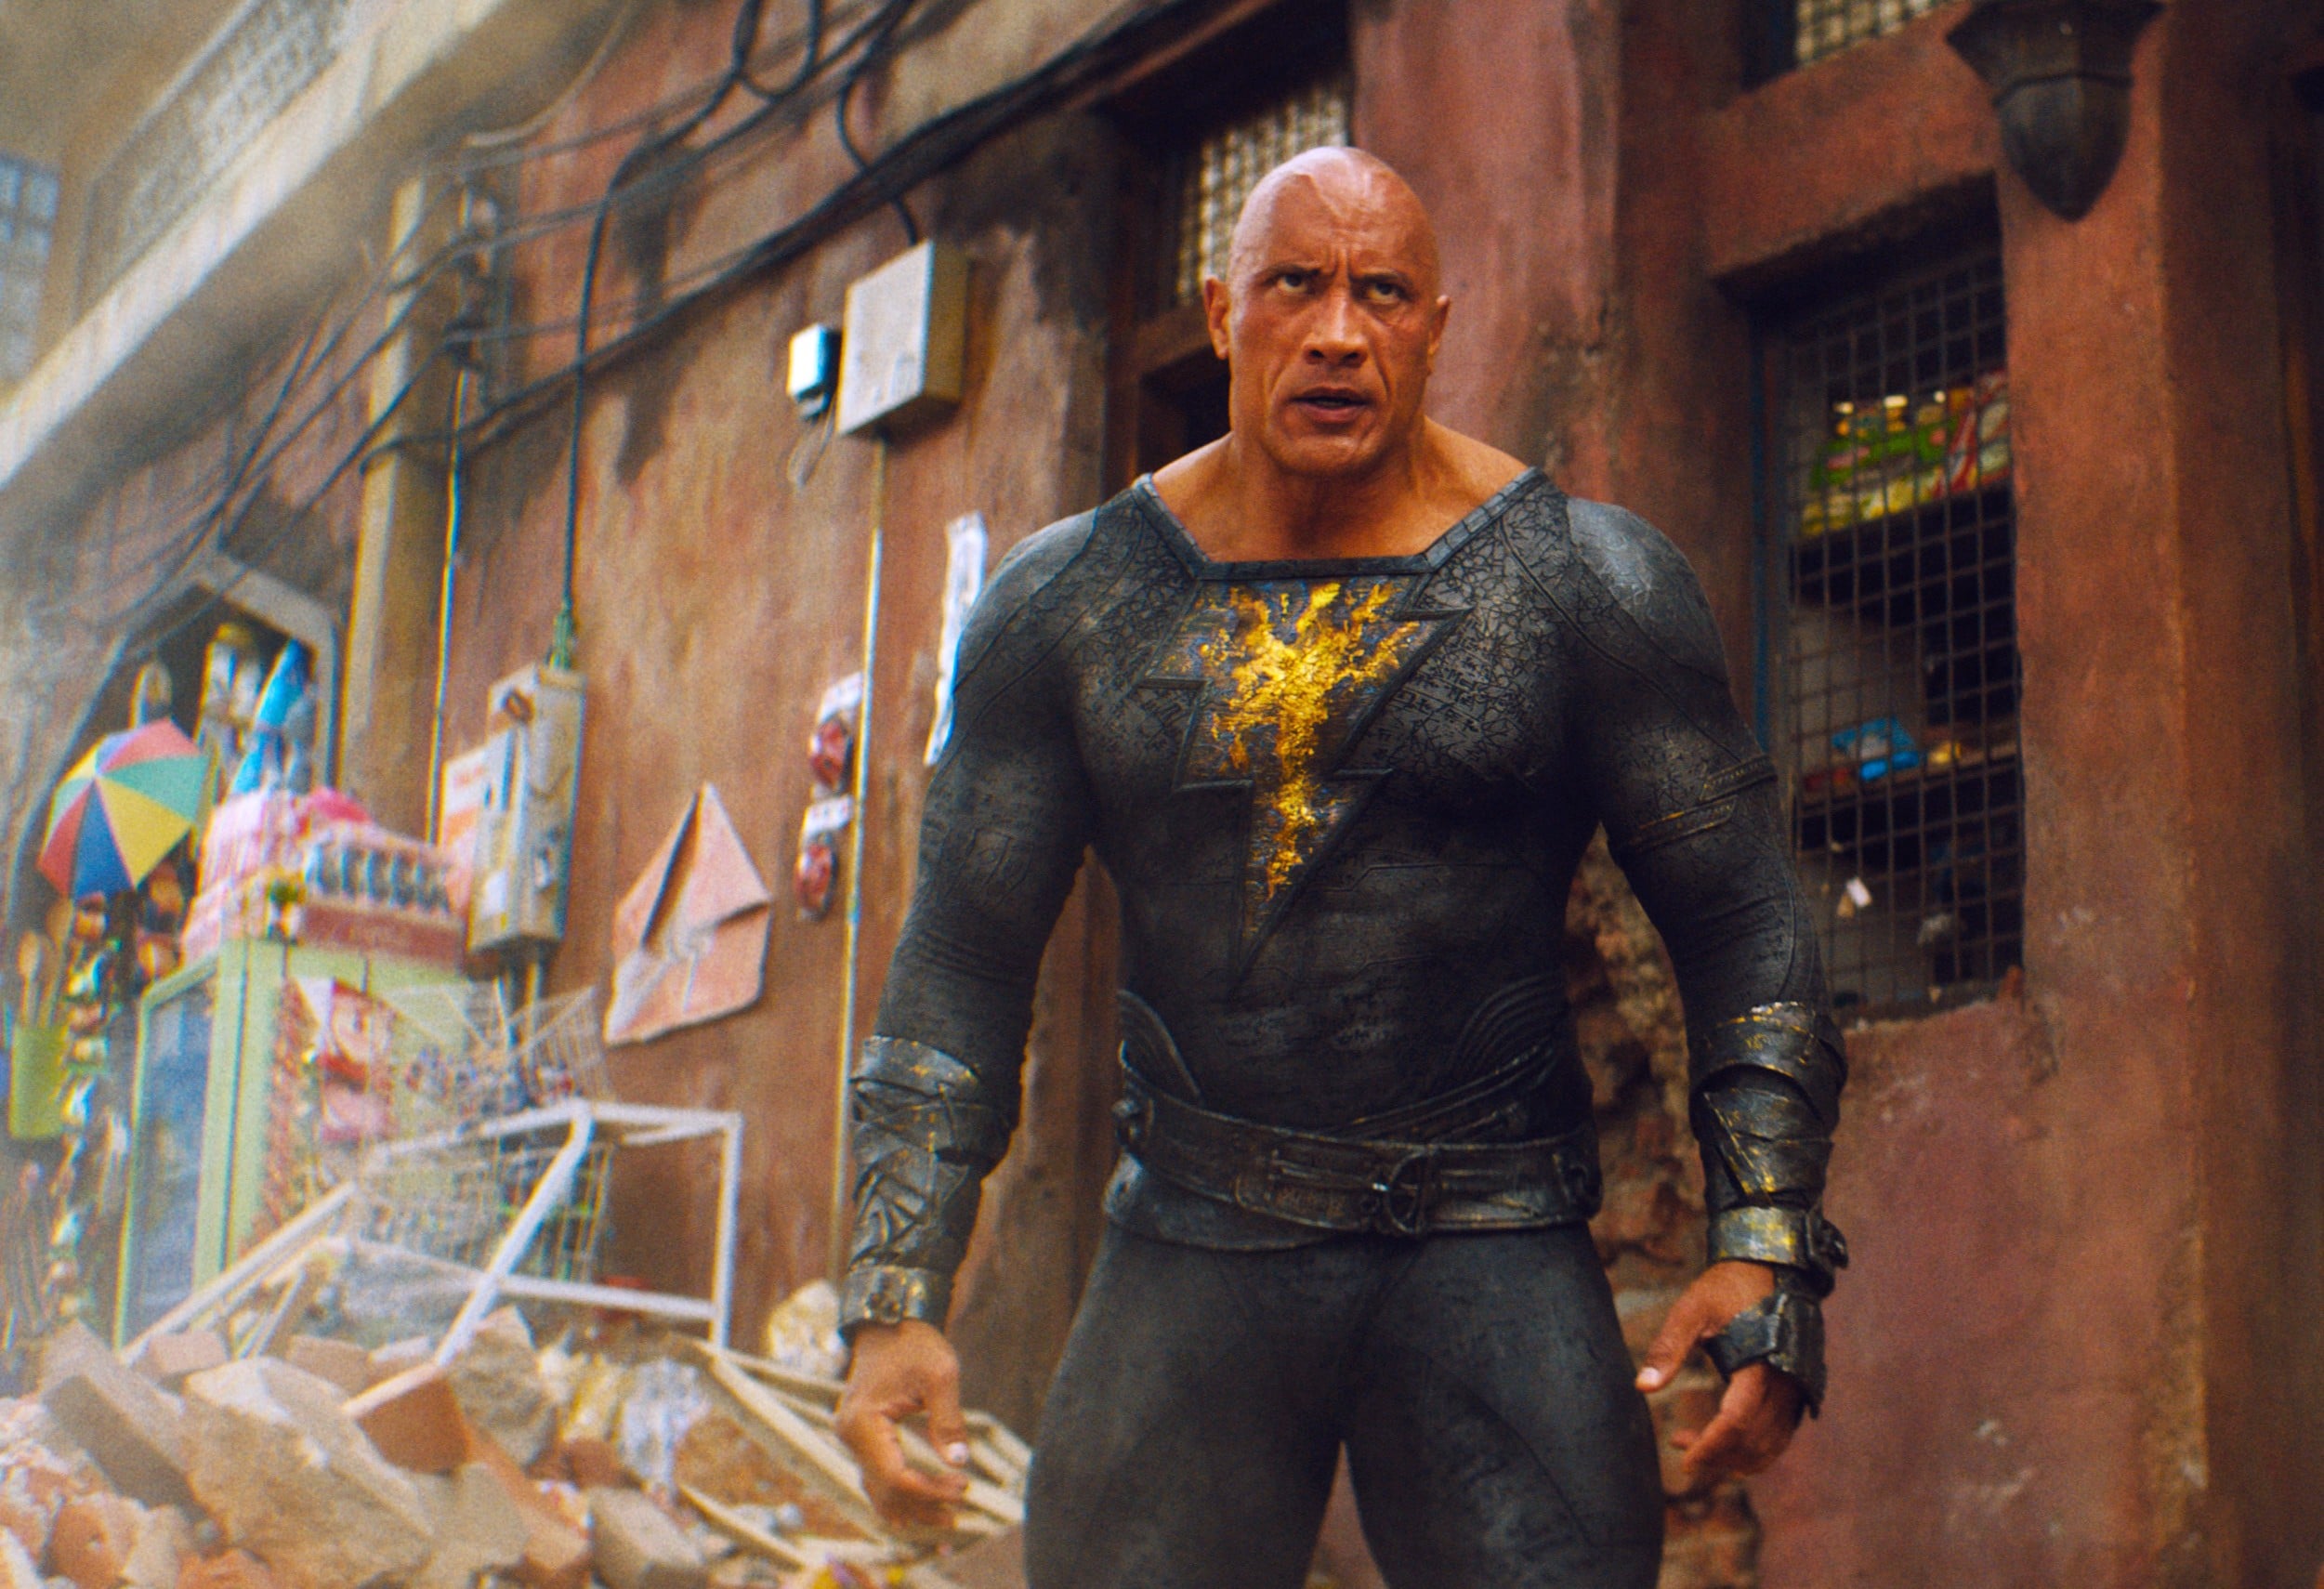 TV Ratings: Dwayne 'The Rock' Johnson Has Two Top Movies